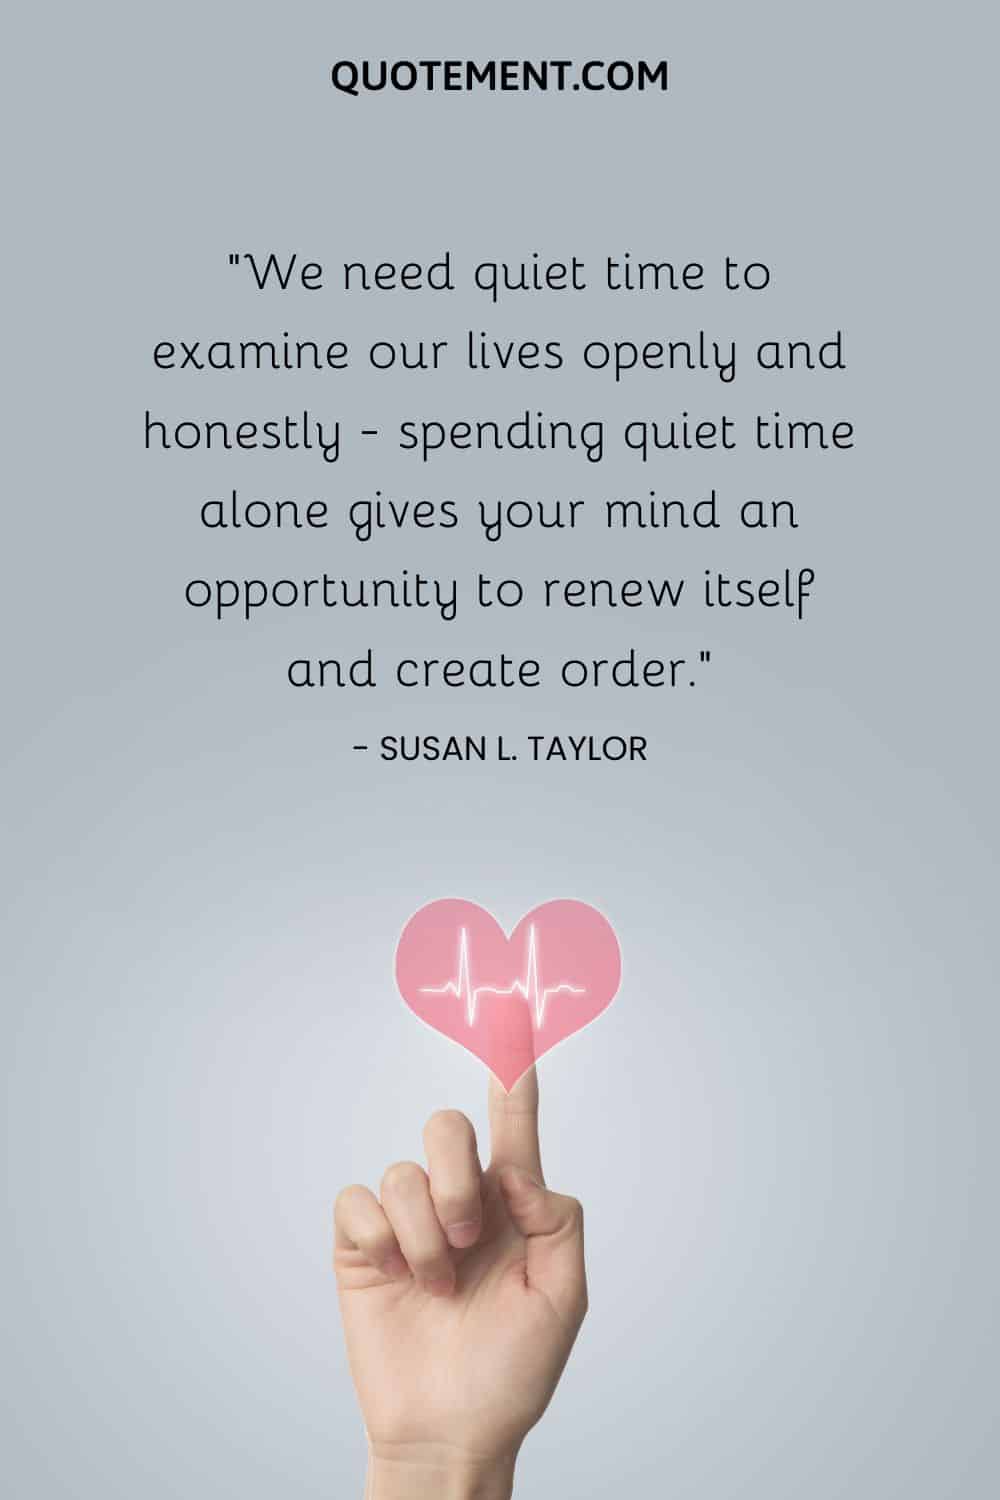 We need quiet time to examine our lives openly and honestly